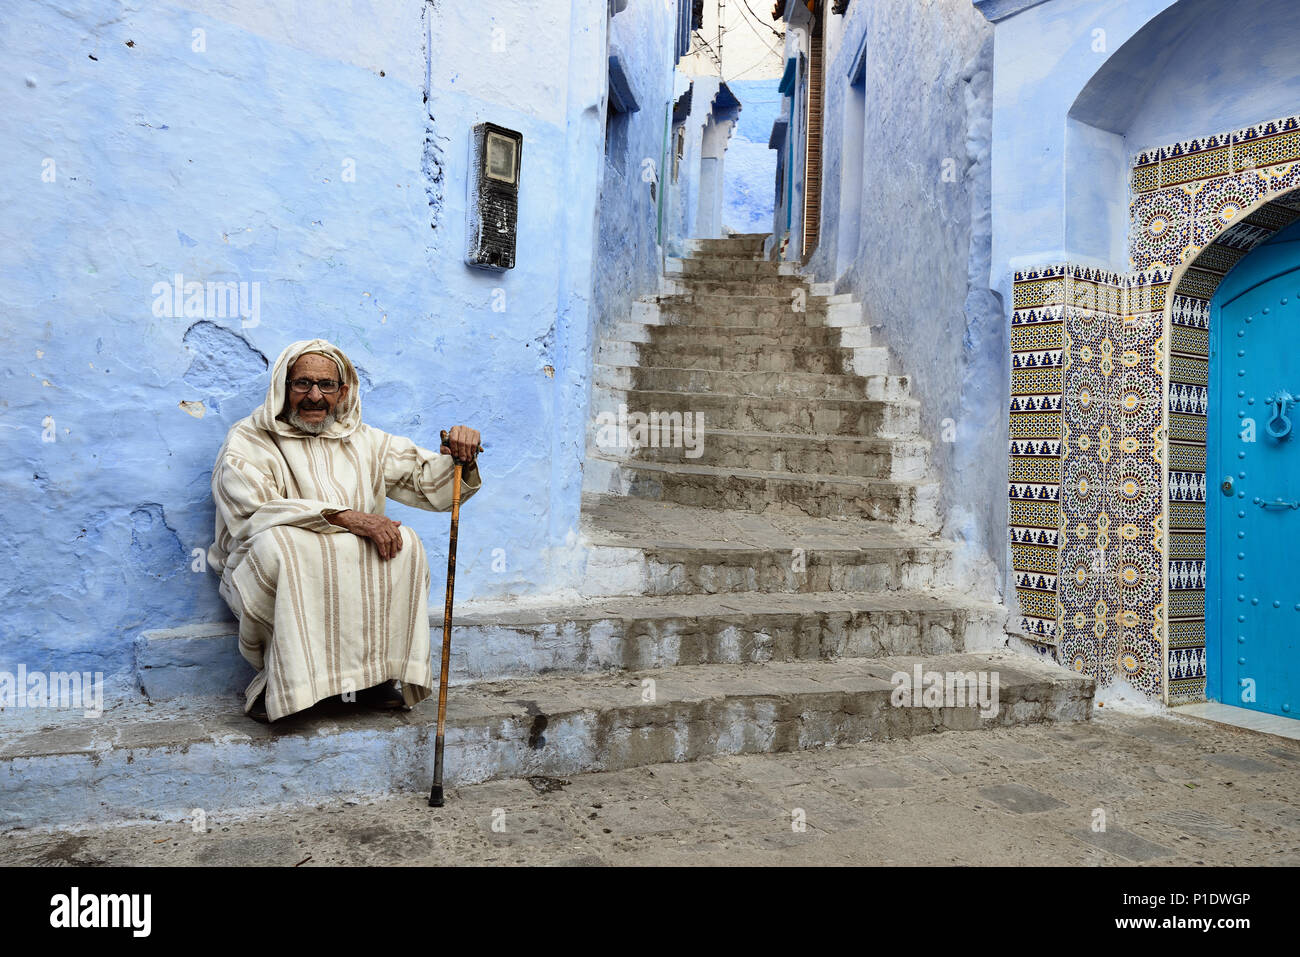 CHEFCHAOUEN, MOROCCO - 27 NOVEMBER 2015:  Older man sitting on the doorstep of the house in the blue city in Morocco Stock Photo